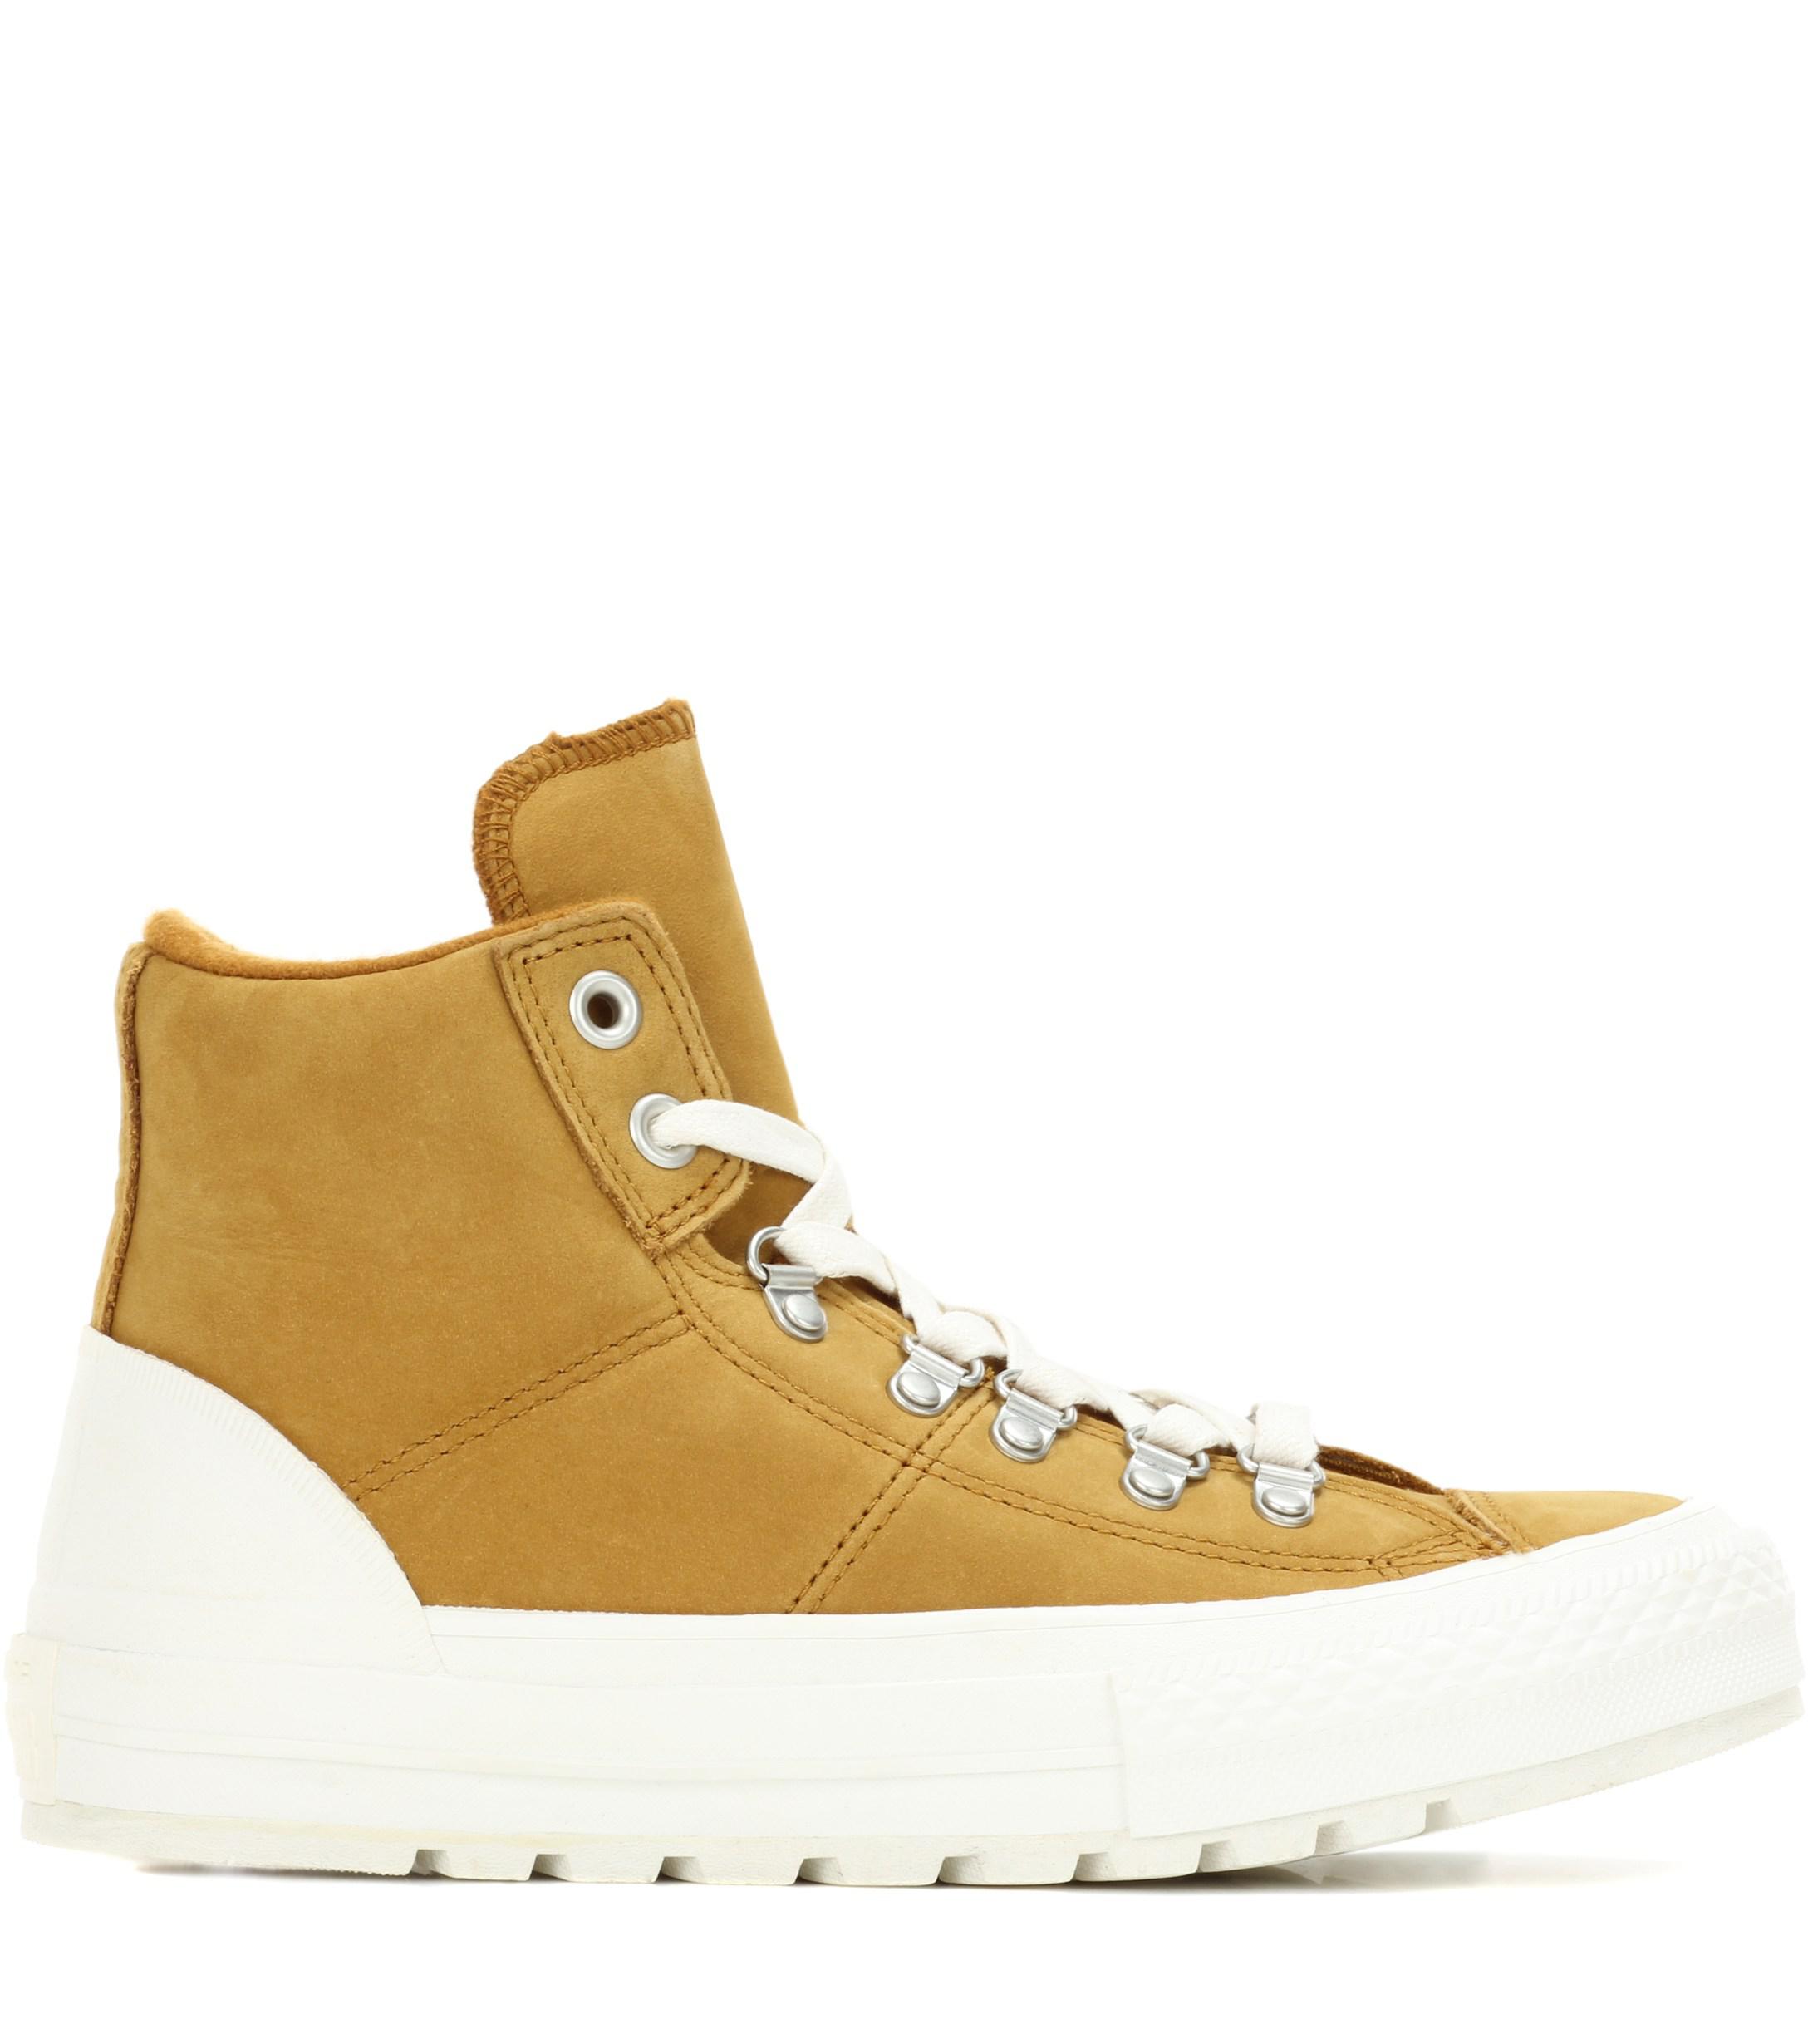 Converse Chuck Taylor All Star Street Hiker Suede Sneakers in Brown - Lyst